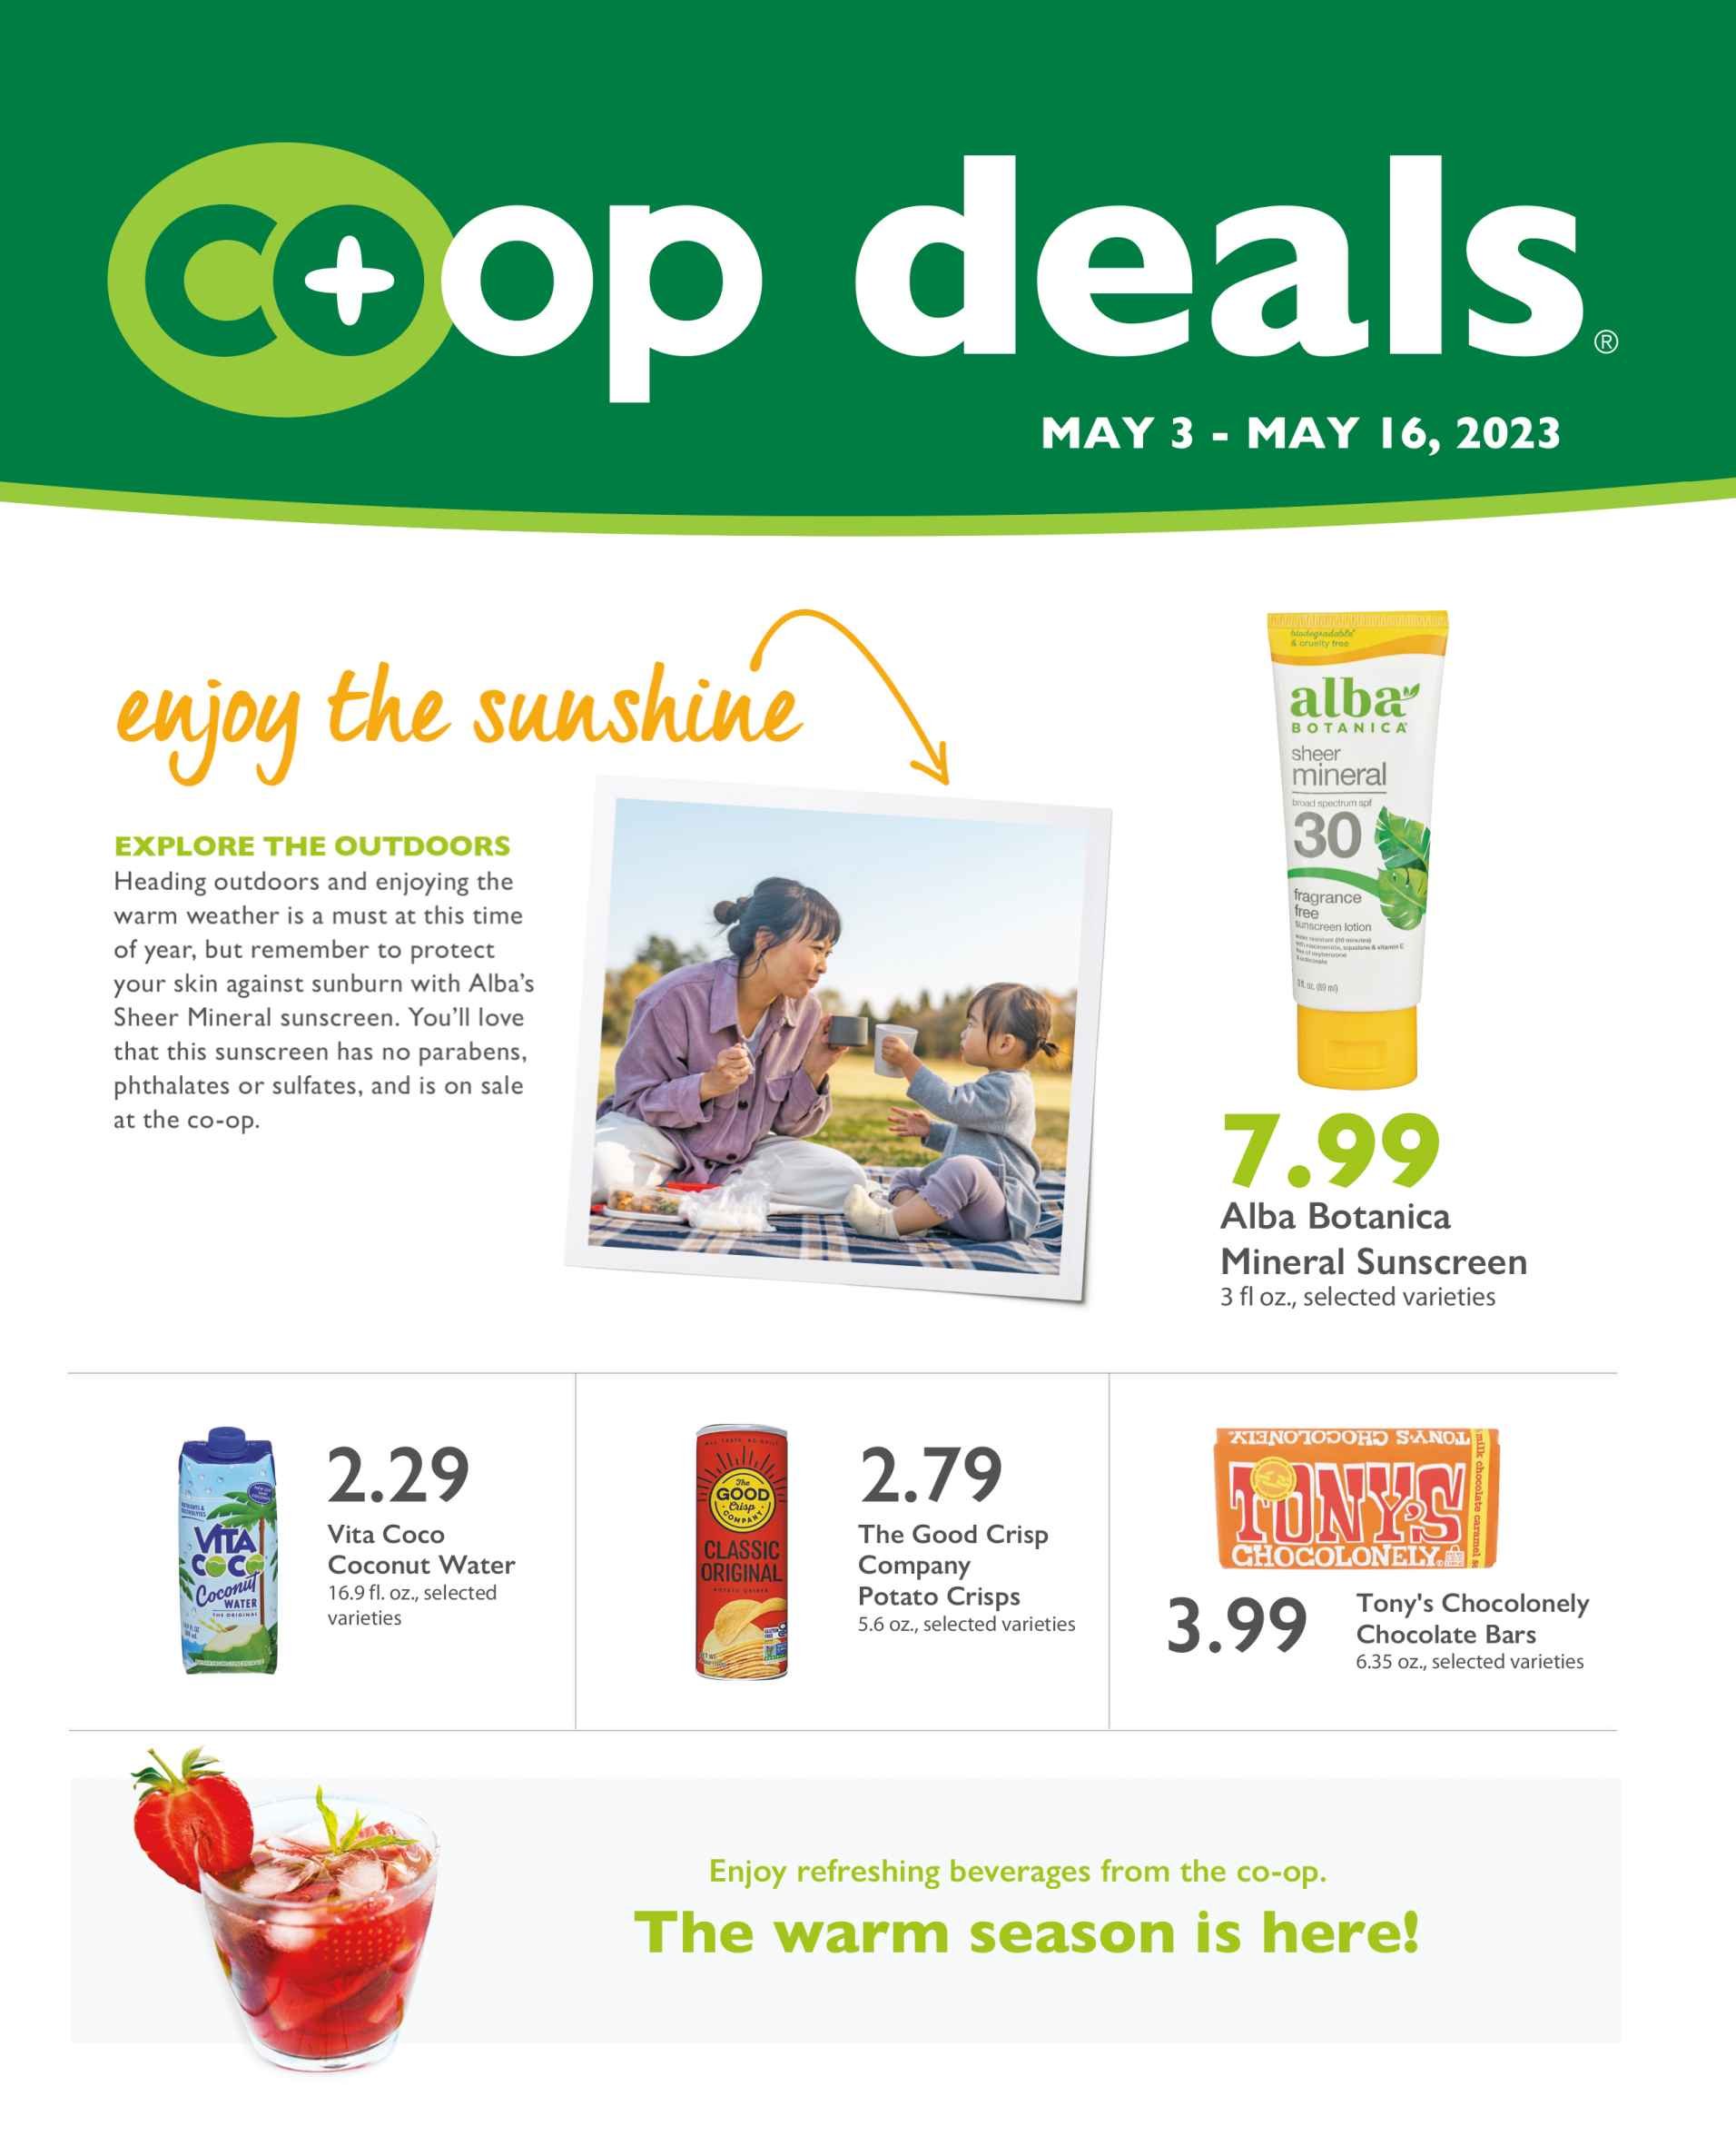 Co+op_Deals_May_2023_Flyer_West_A_Page (1).jpg